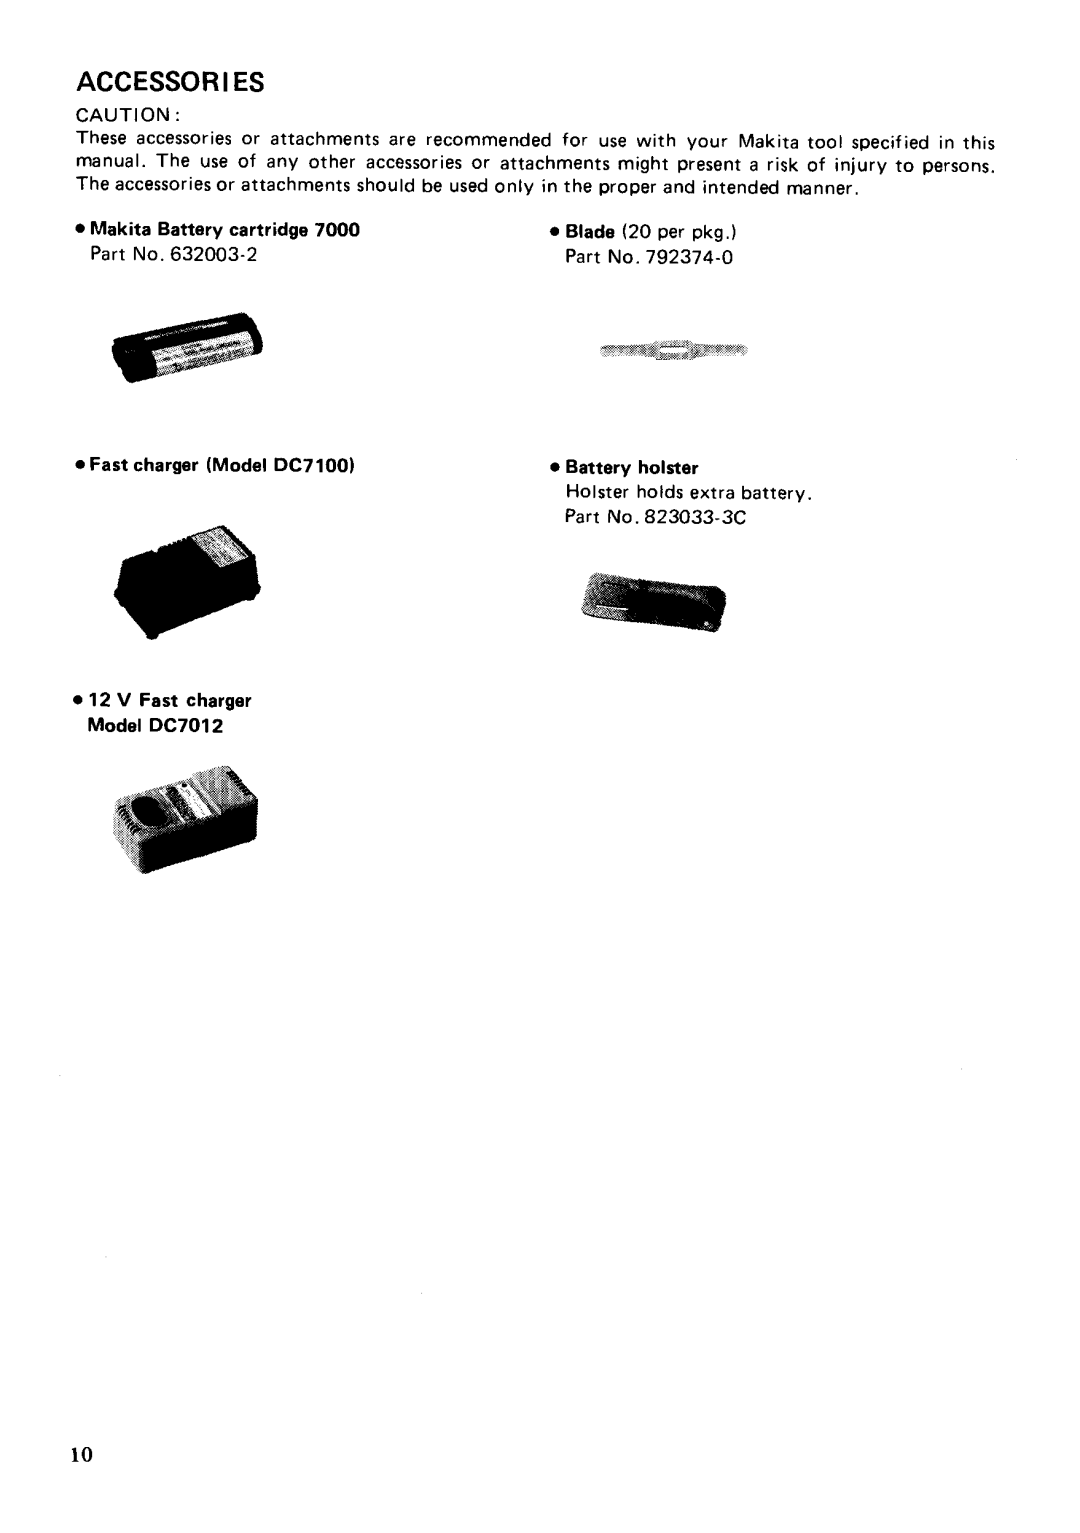 Makita UML2OOD, UMLZOODW specifications Accessori Es, Makita Battery cartridge, Fast charger Model DC7100, Battery holster 